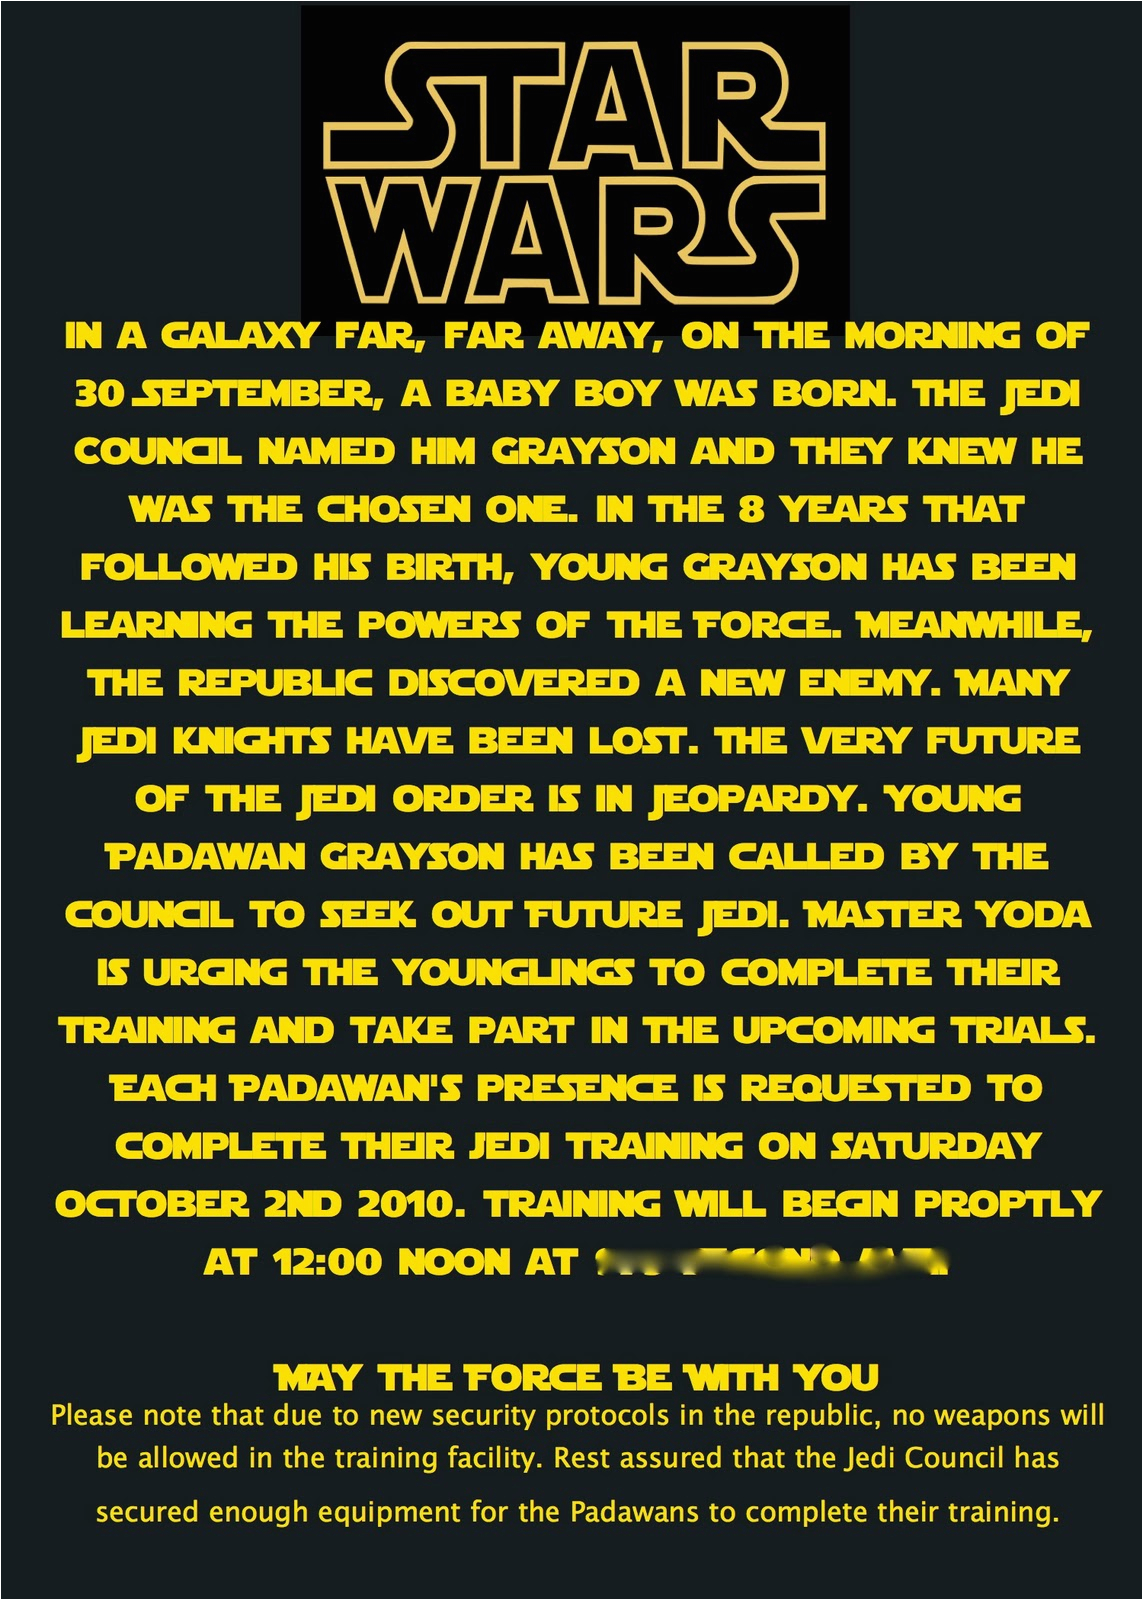 Star Wars Birthday Invitation Wording at Second Street Star Wars Party What I Did